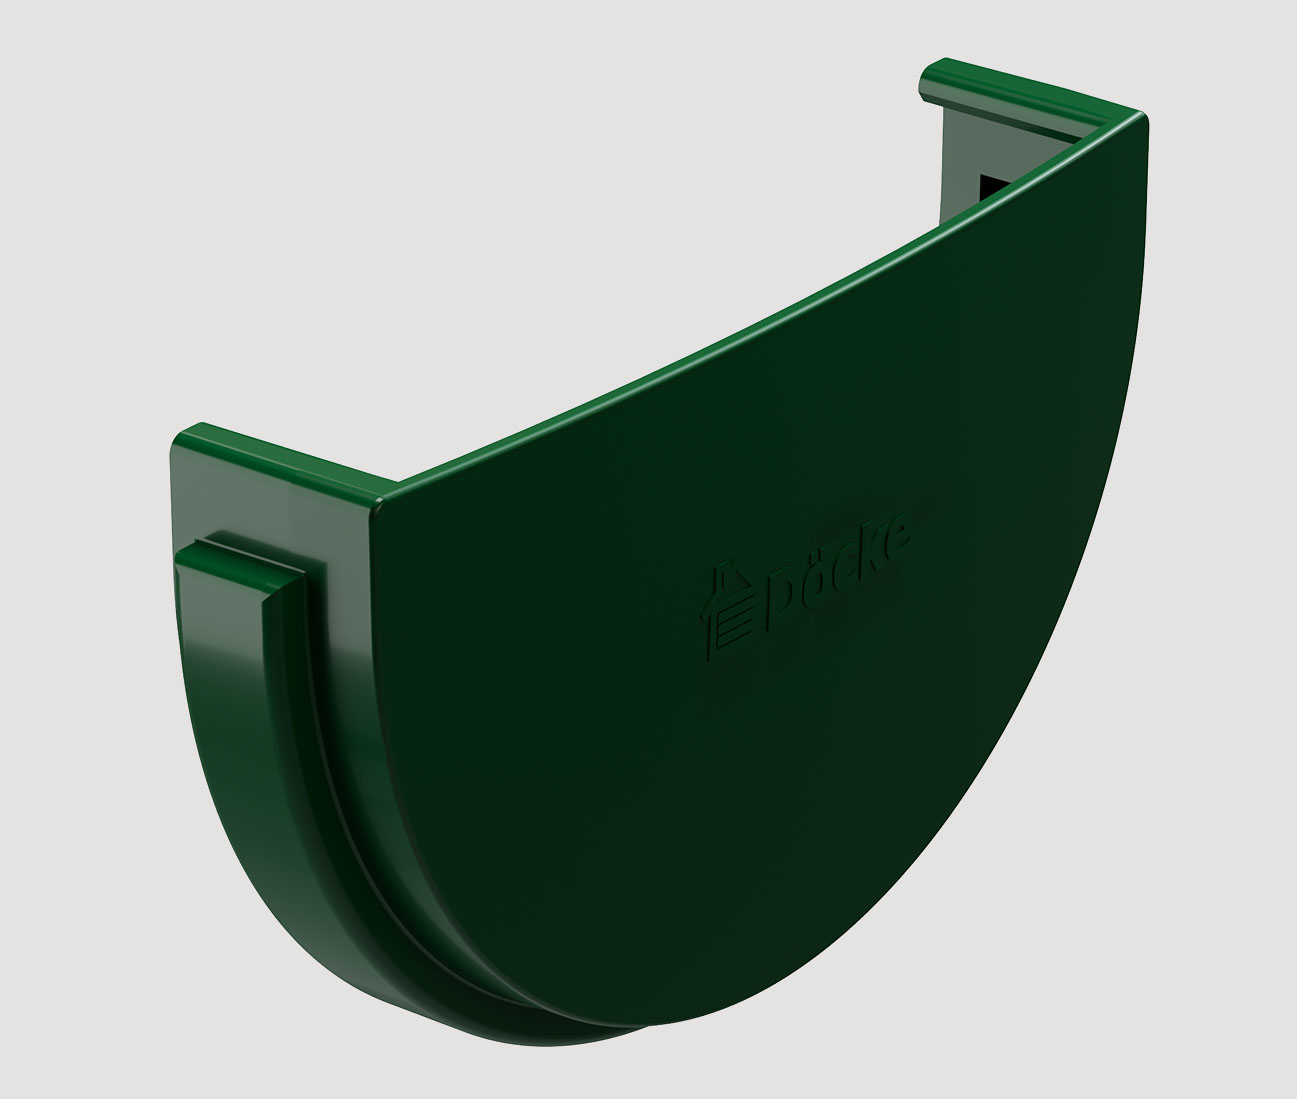 Водостоки - STANDARD SERIES Green RAL 6005 - Elements of the drainage system - Gutter plug